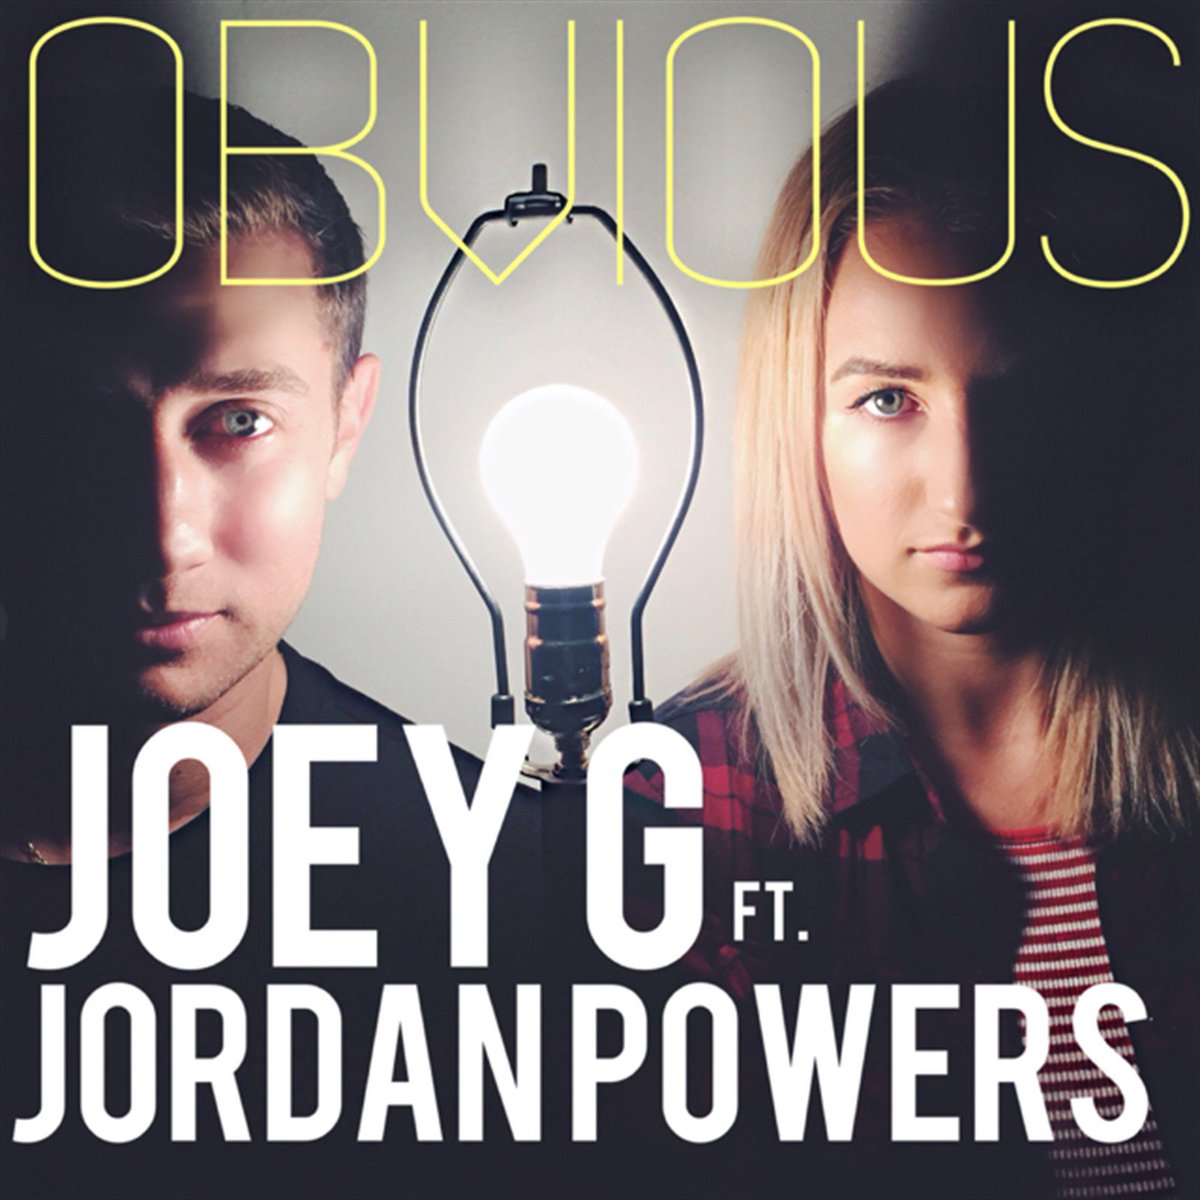 HEY EVERYBODY! GO LISTEN TO THIS NEW SONG BY MY BOY @ThisisJoeyG AND @jaepowerz BC IT'S VERY COOOL 😎😚 #Obvious